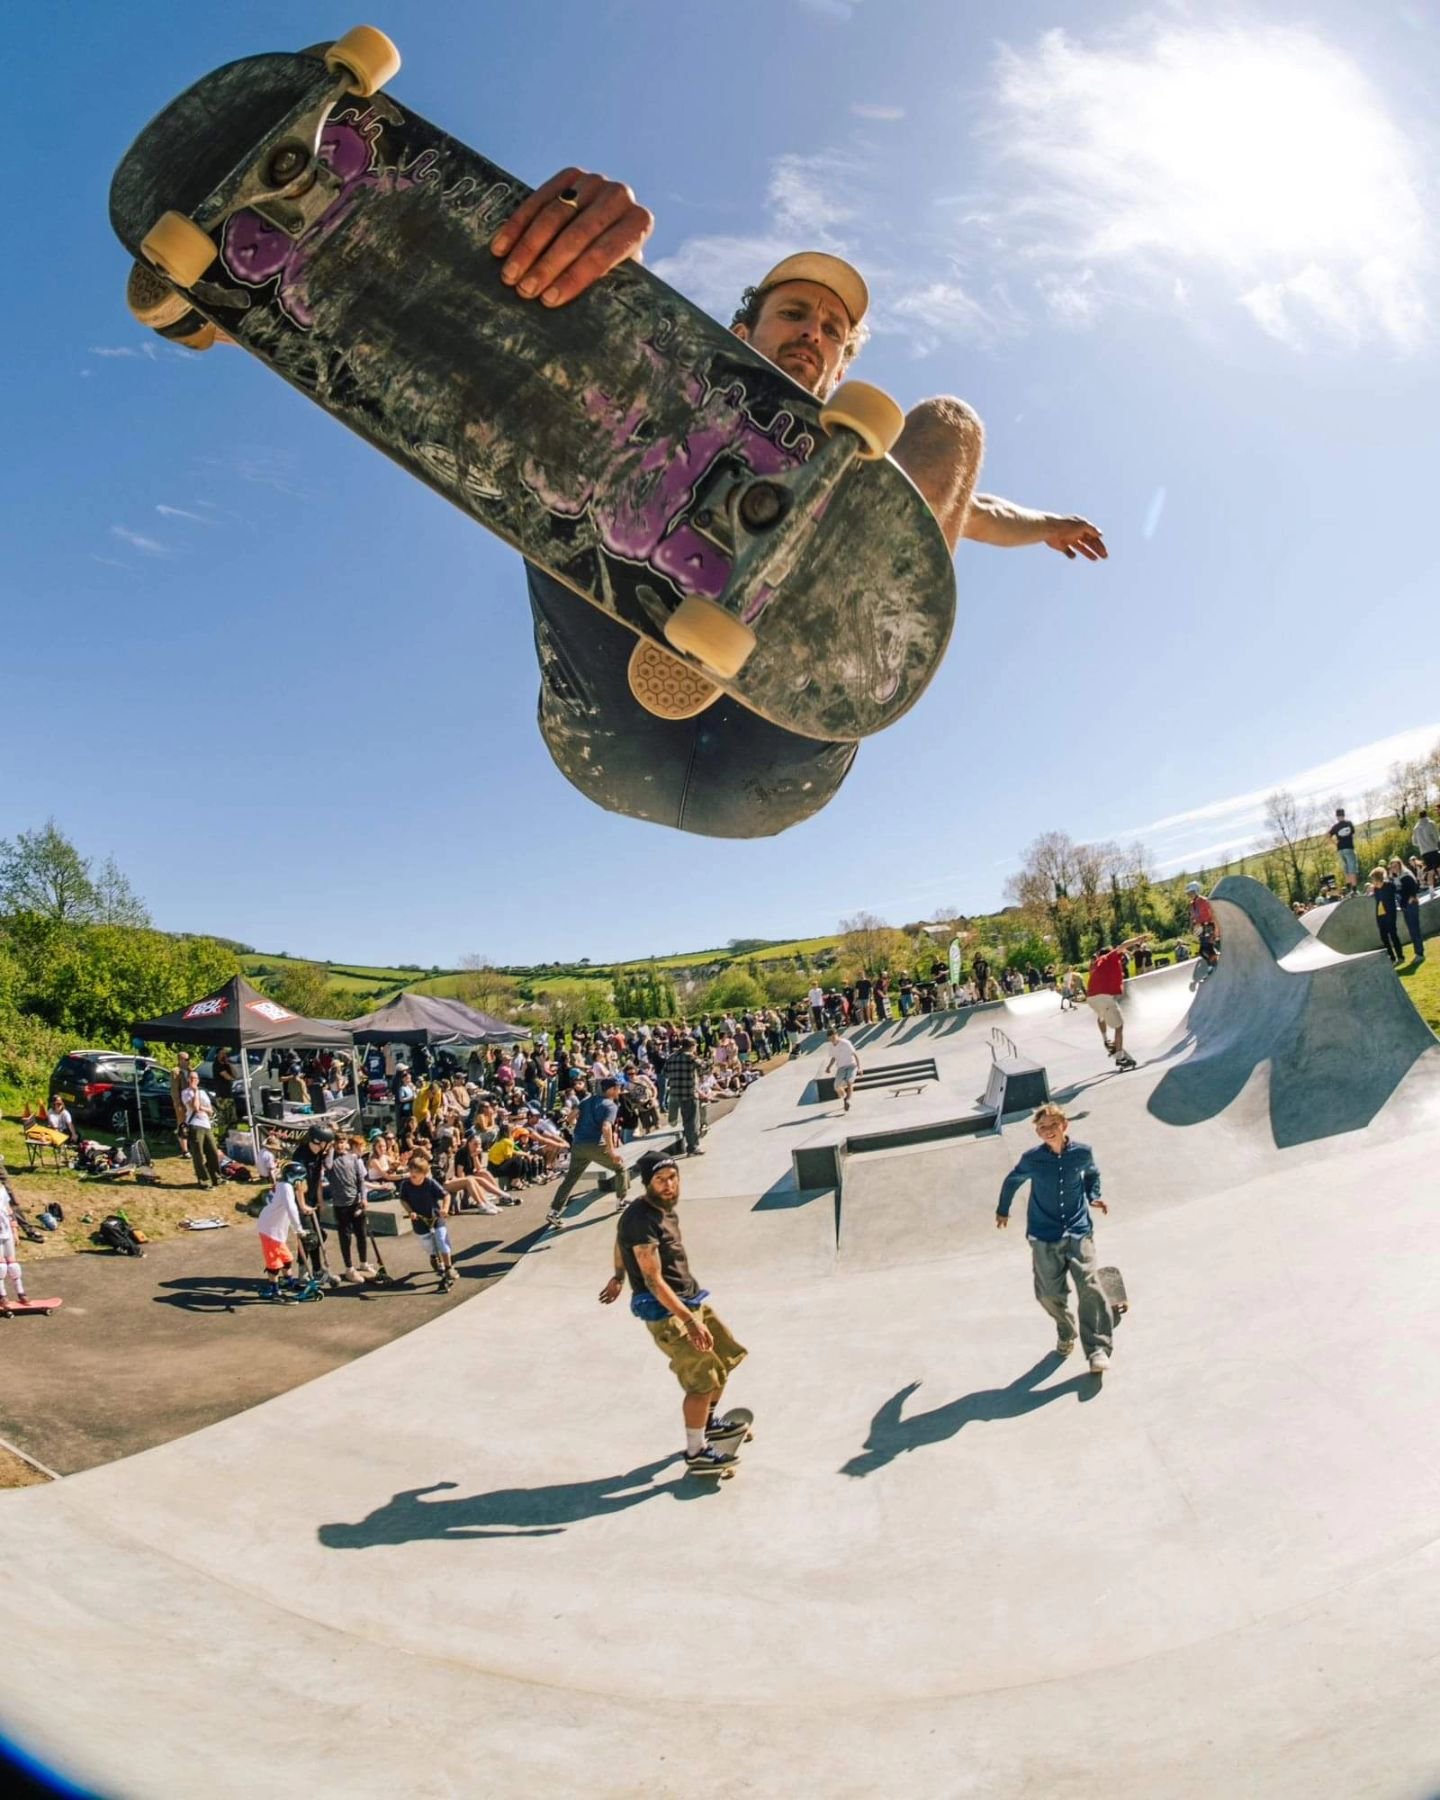 Fantastic to see the Millbrook Skatepark in action last weekend as the inaugural skate jam got underway to celebrate the recent opening. 

The local community in Millbrook and the surrounding areas of the Rame Peninsula successfully raised over &poun